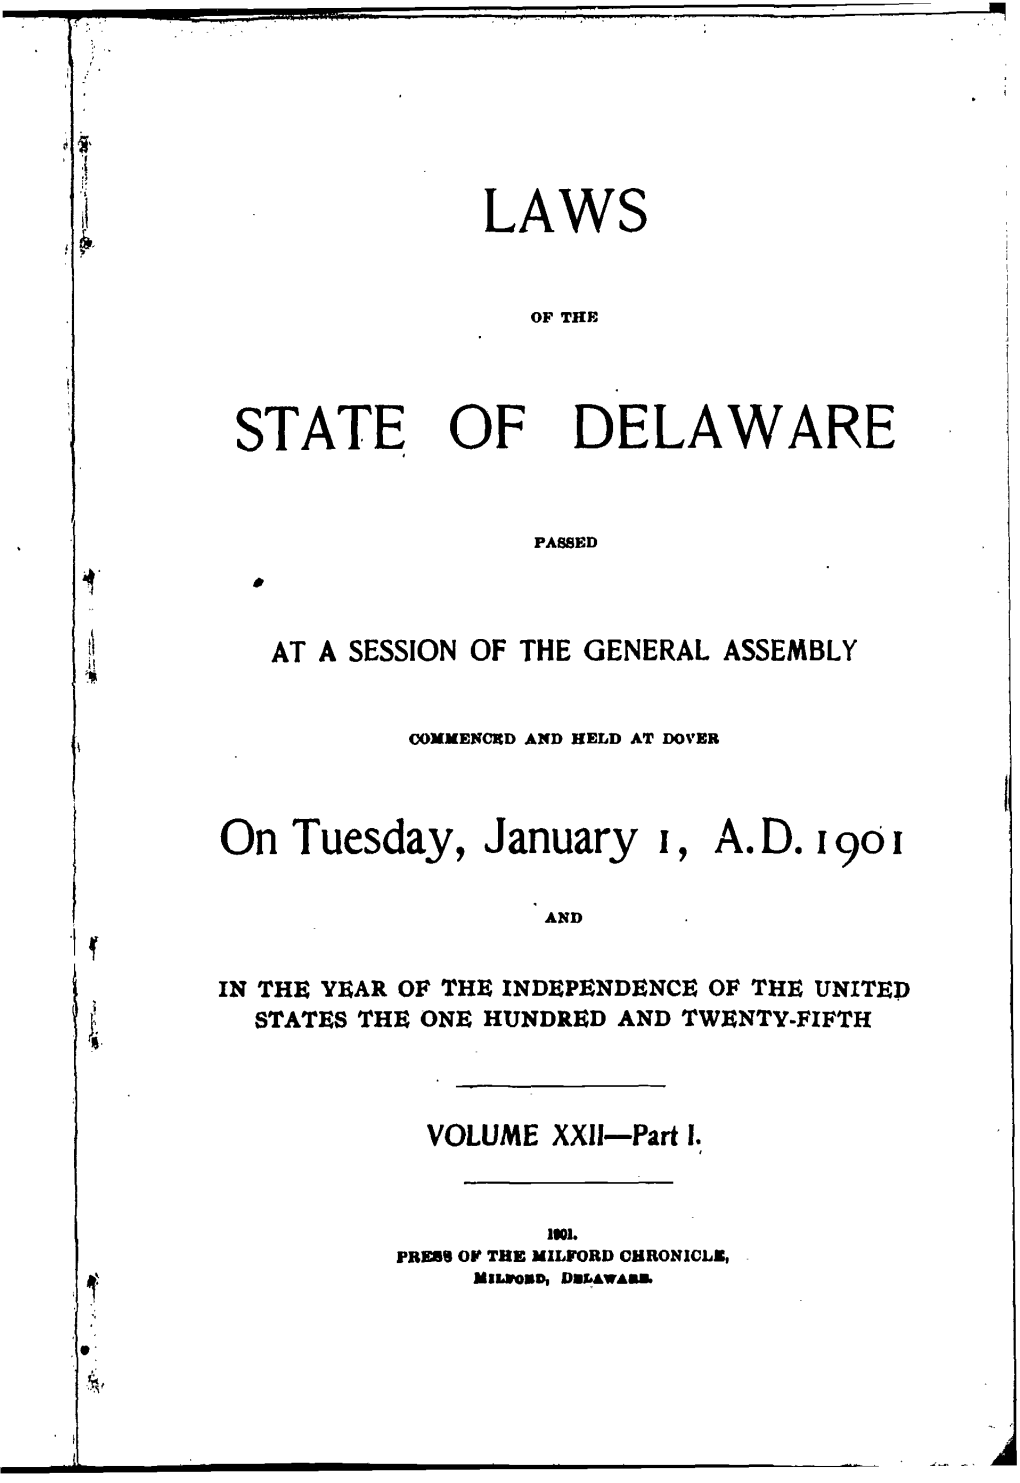 Laws of the State of Delaware; and After Their Cl First Meeting They Shall Meet at the County Building in the Meet Mg, U